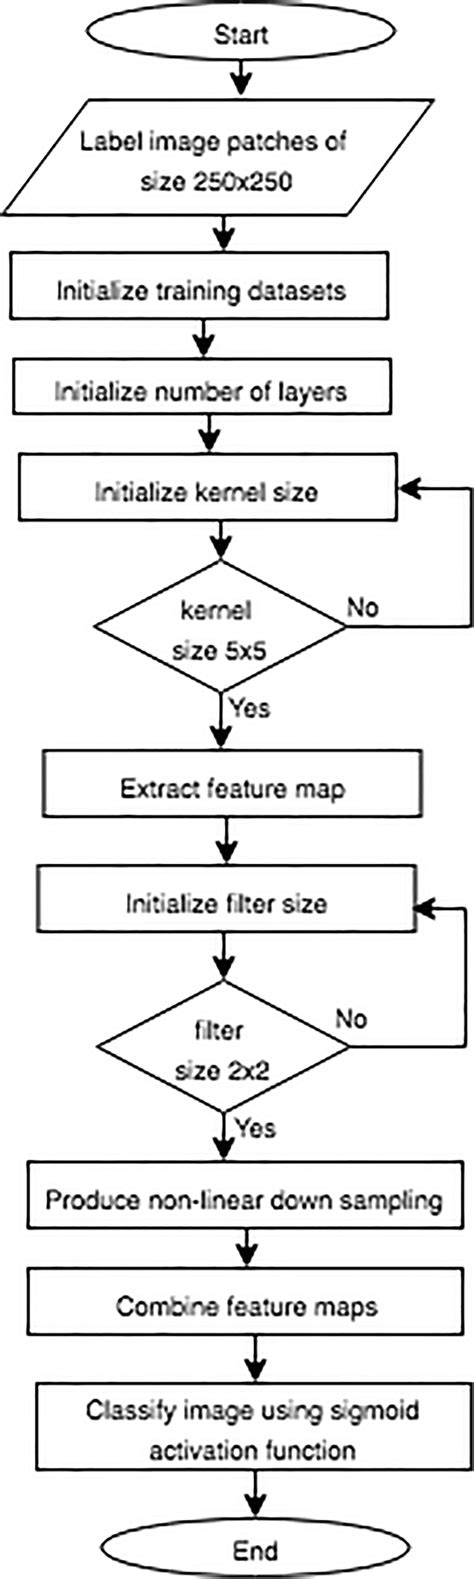 Flowchart Of Cancer Image Patch Refinement Deep Learning Algorithm